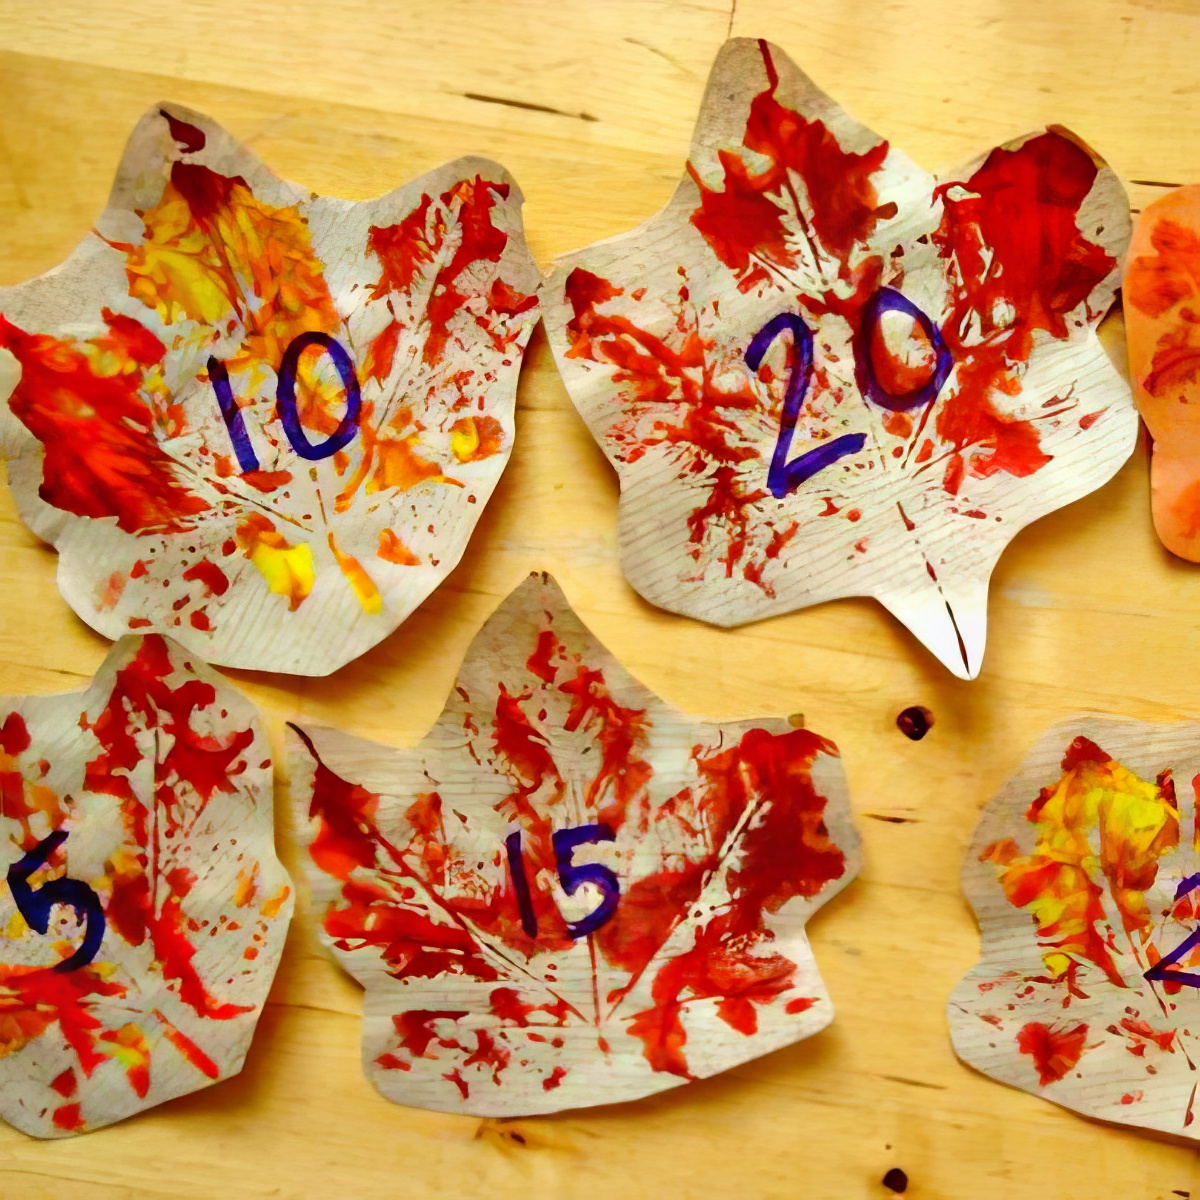 leaf math, 13-leafy-crafts-and-activities-for-kids, creative leaf crafts for kids